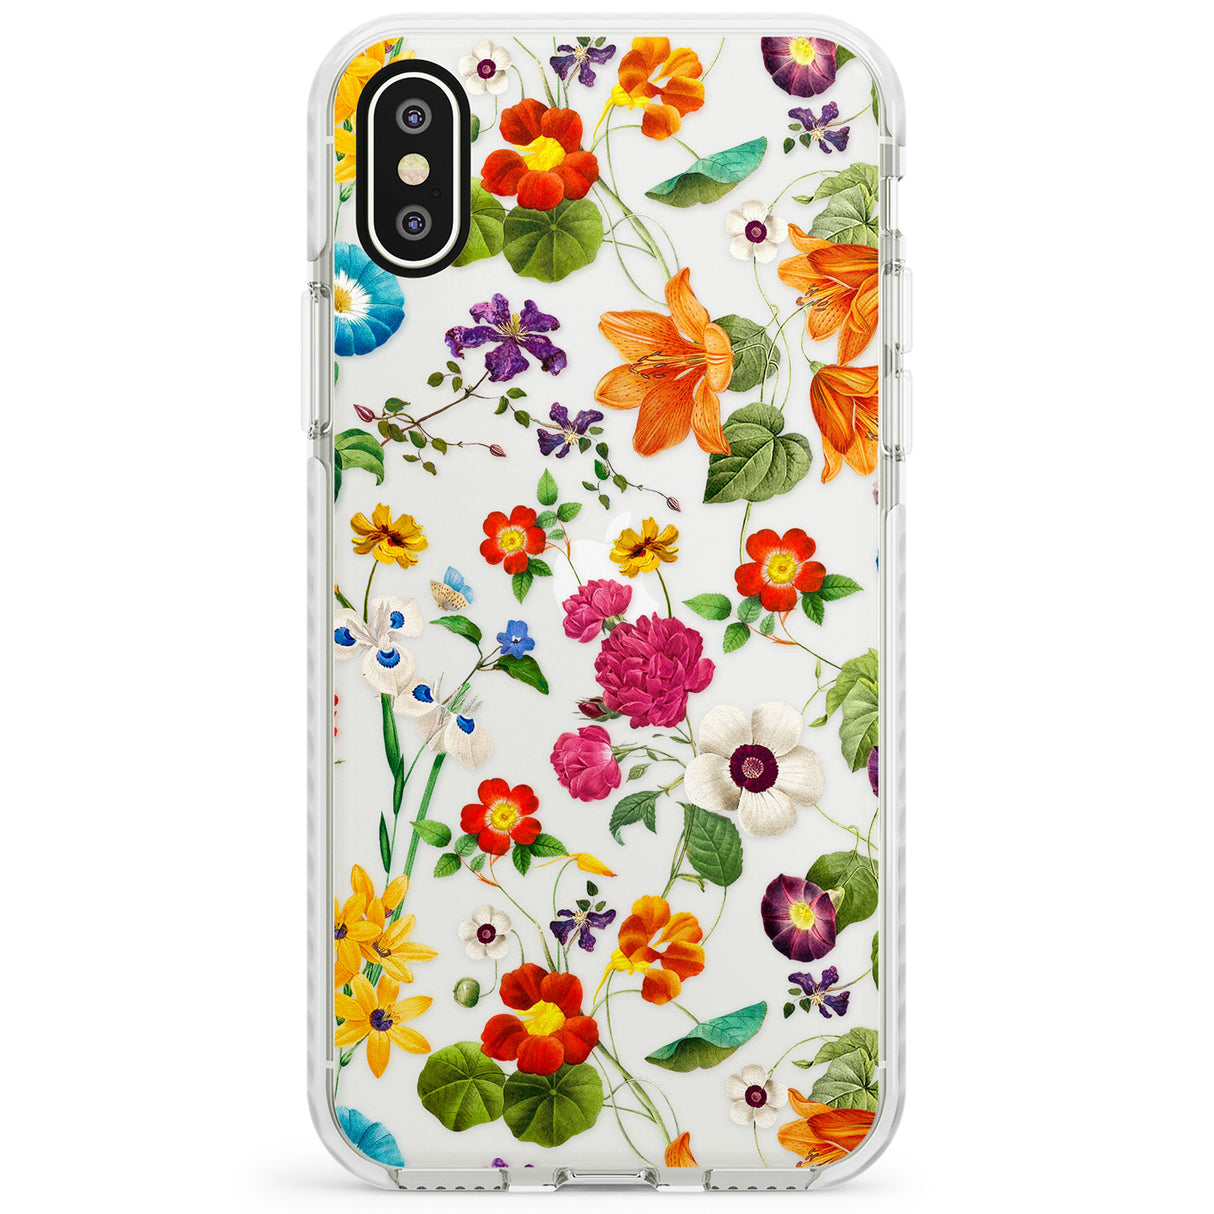 Whimsical Wildflowers Impact Phone Case for iPhone X XS Max XR